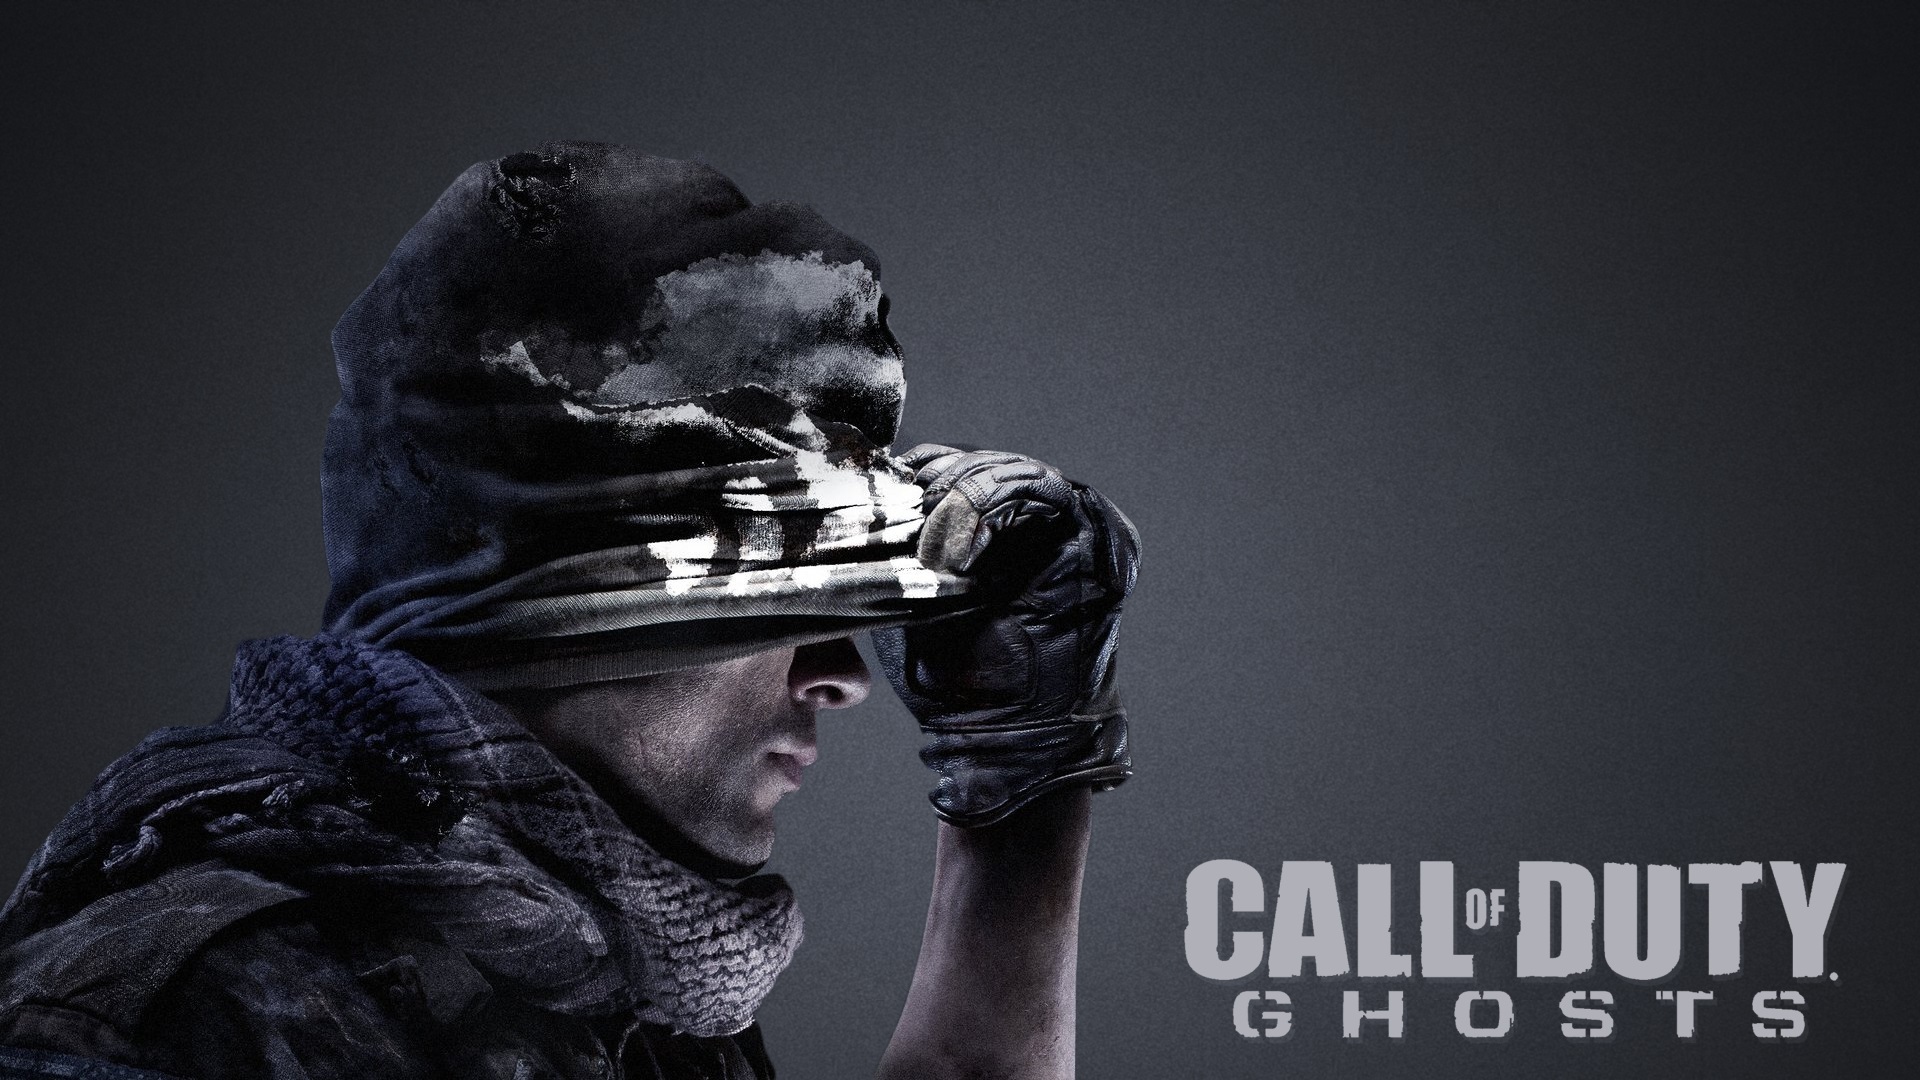 call of duty ghosts wallpaper 1920x1080